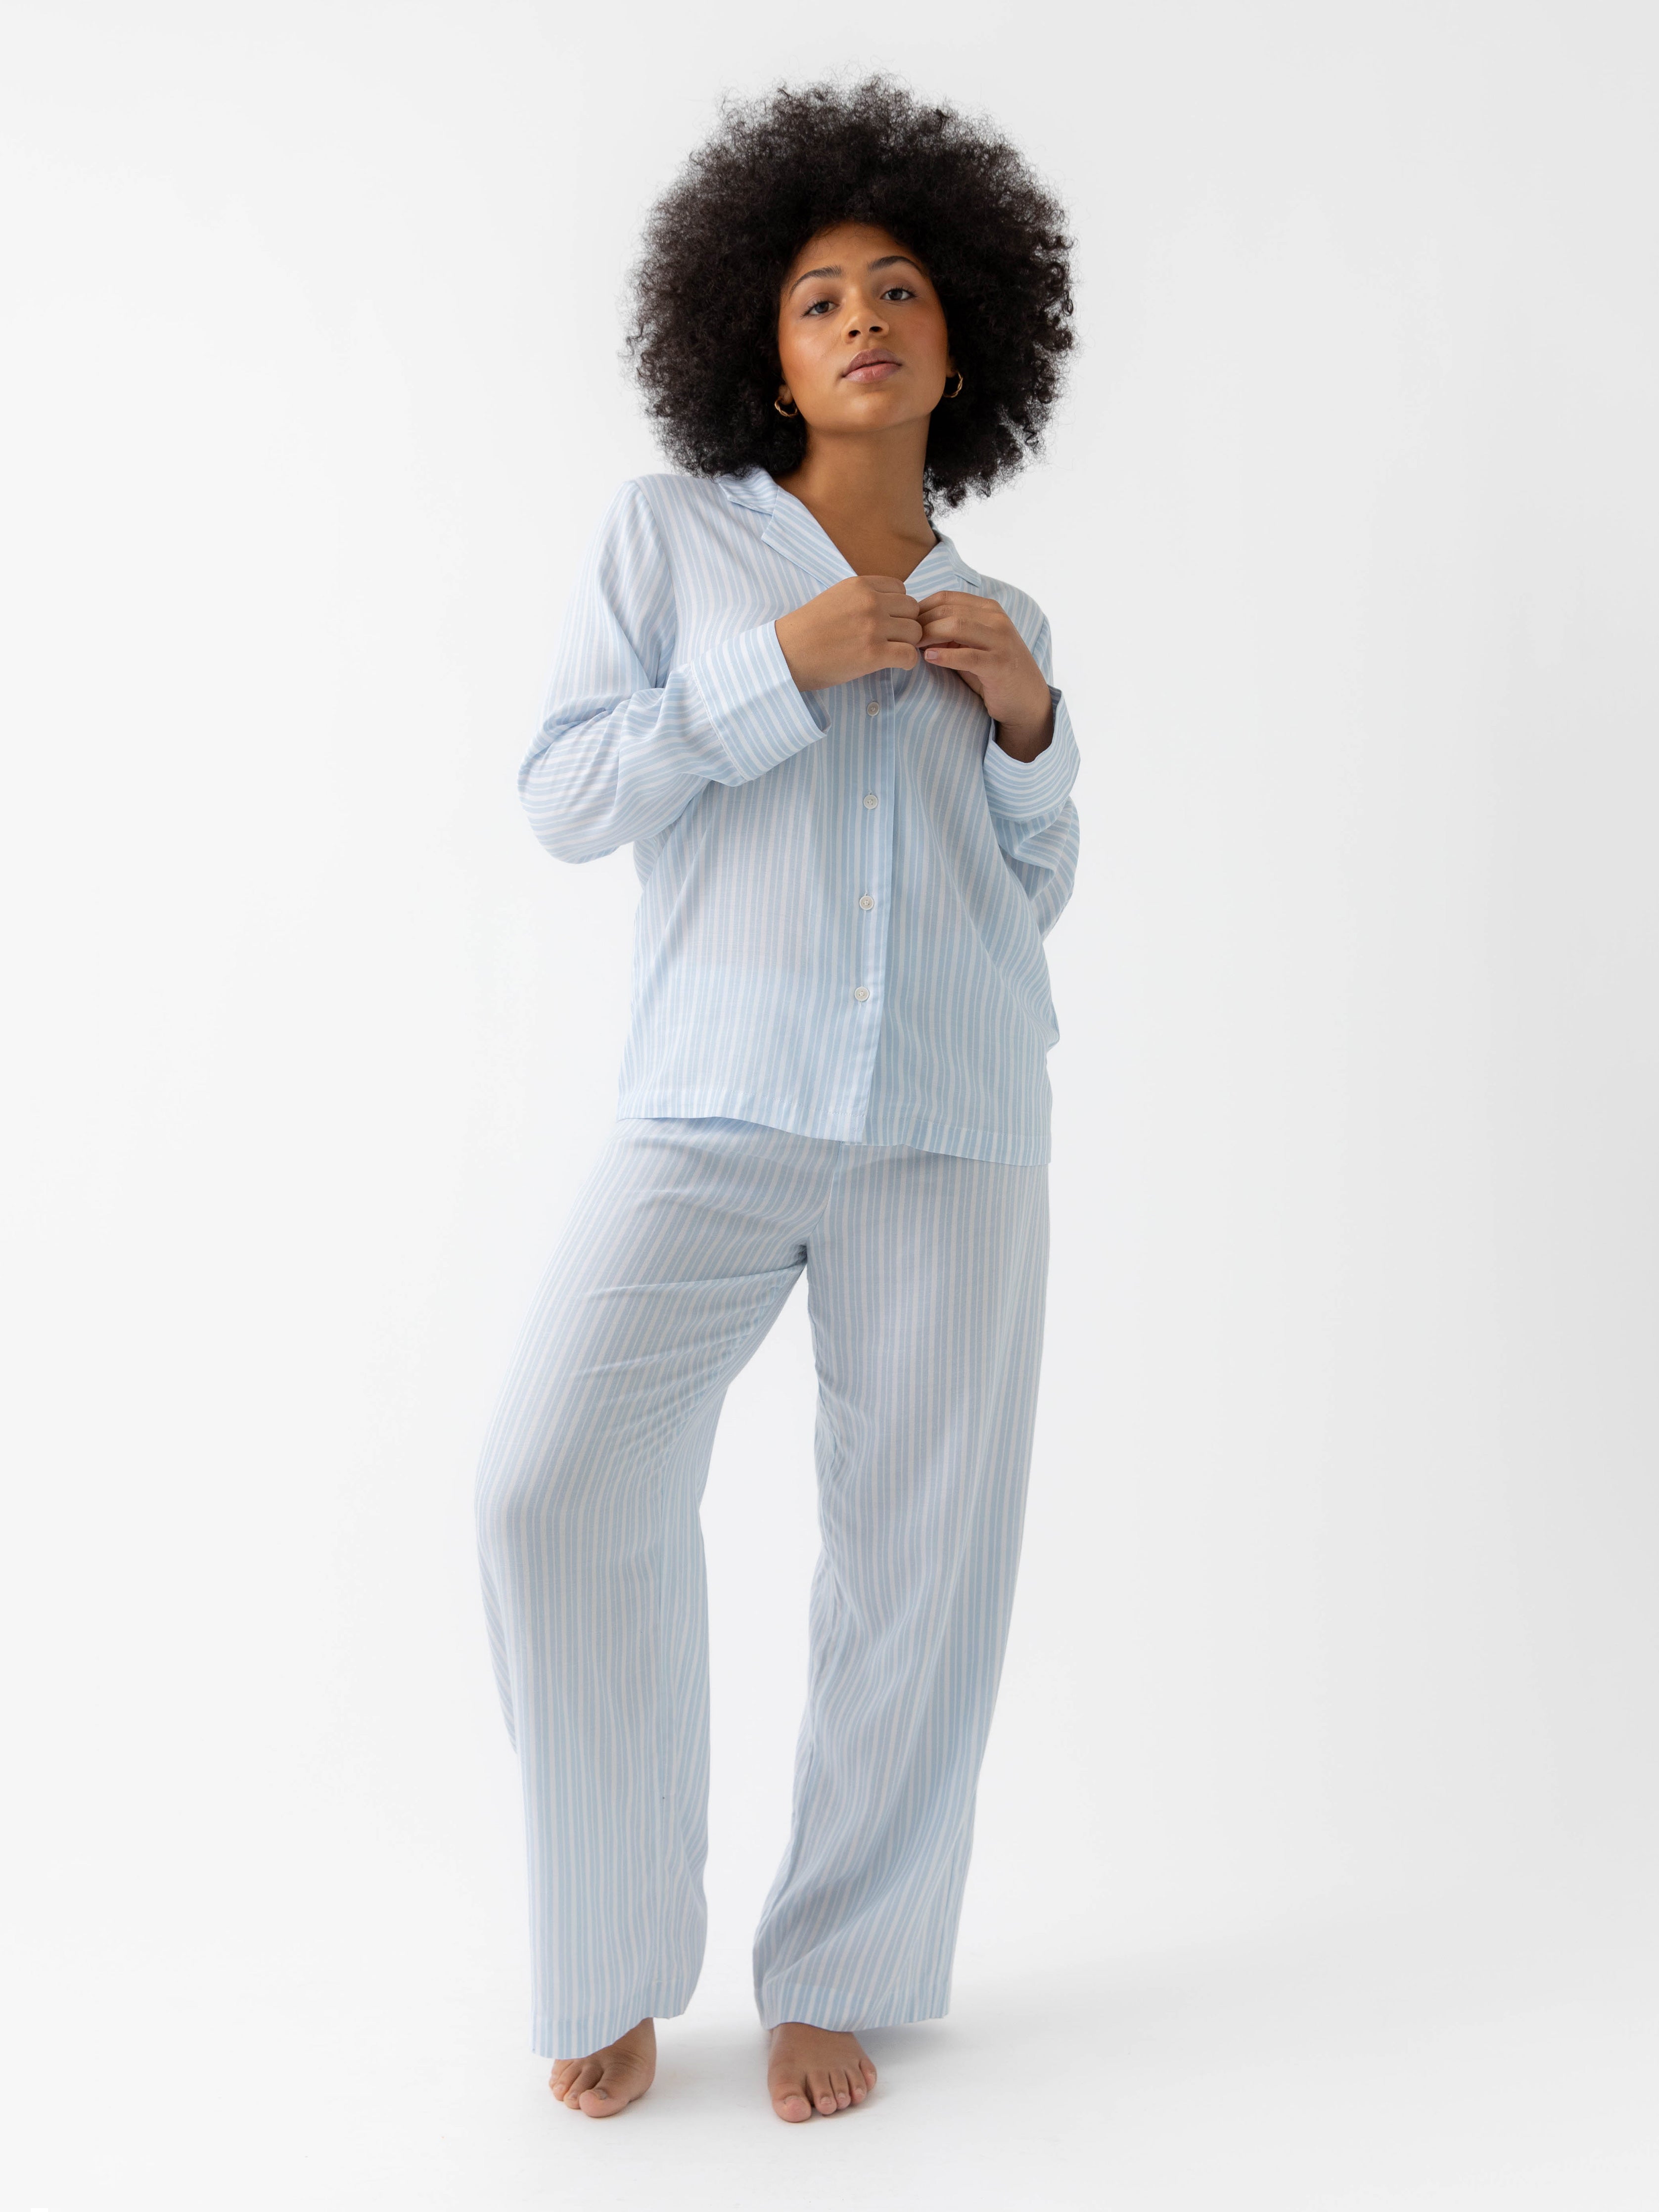 Woman wearing Spring Blue Stripe soft woven pajamas with white background |Color:Spring Blue Stripe